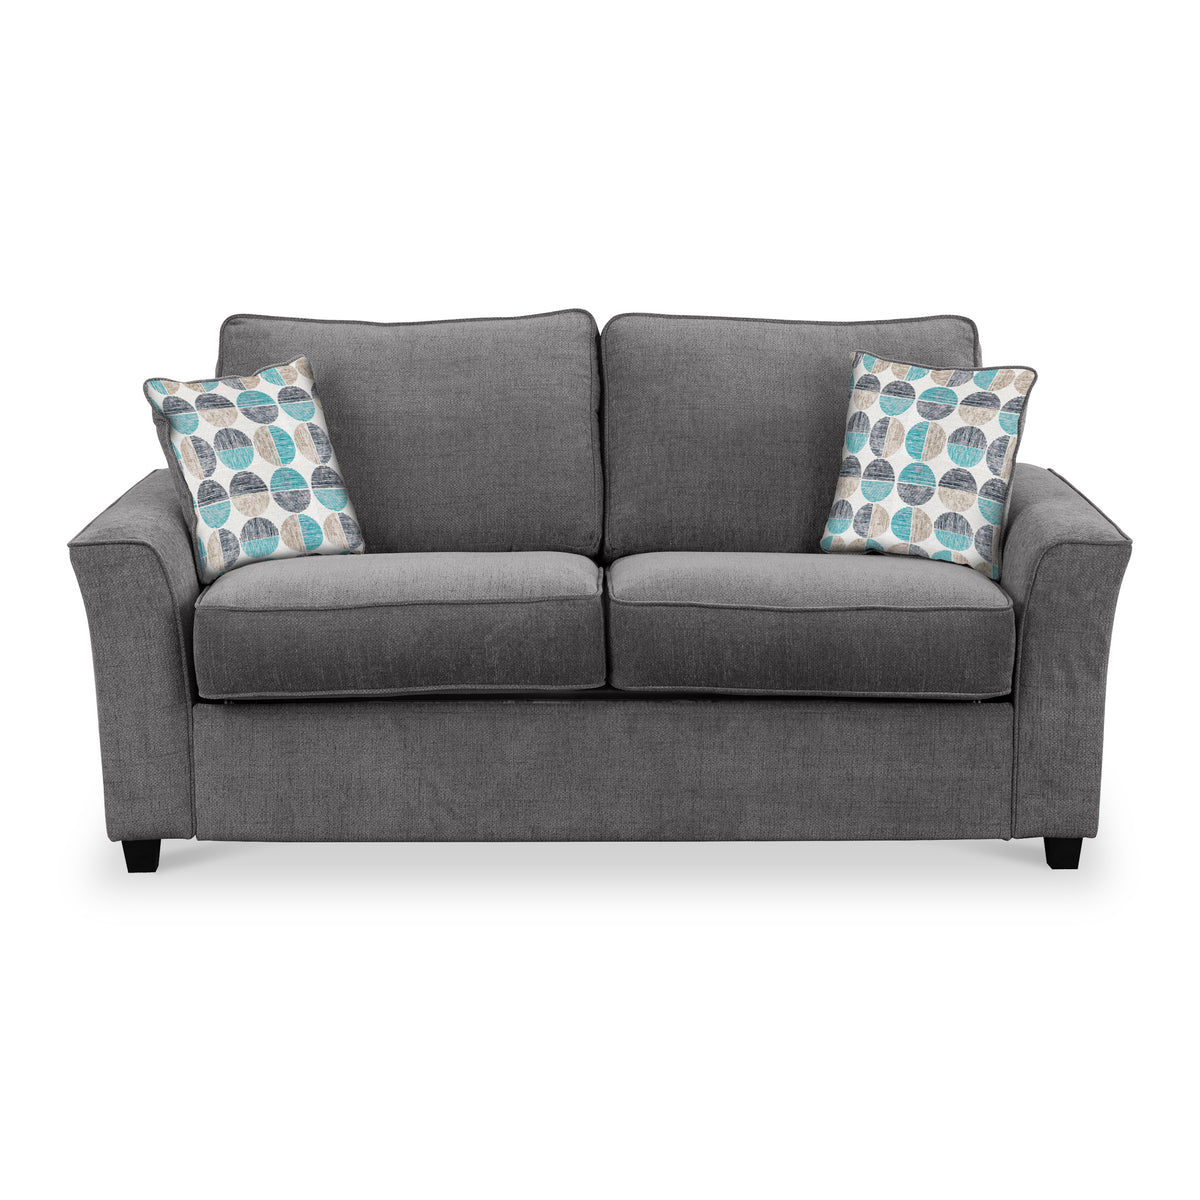 Boston 2 Seater Sofabed in Charcoal with Rufus Duck Egg Cushions by Roseland Furniture